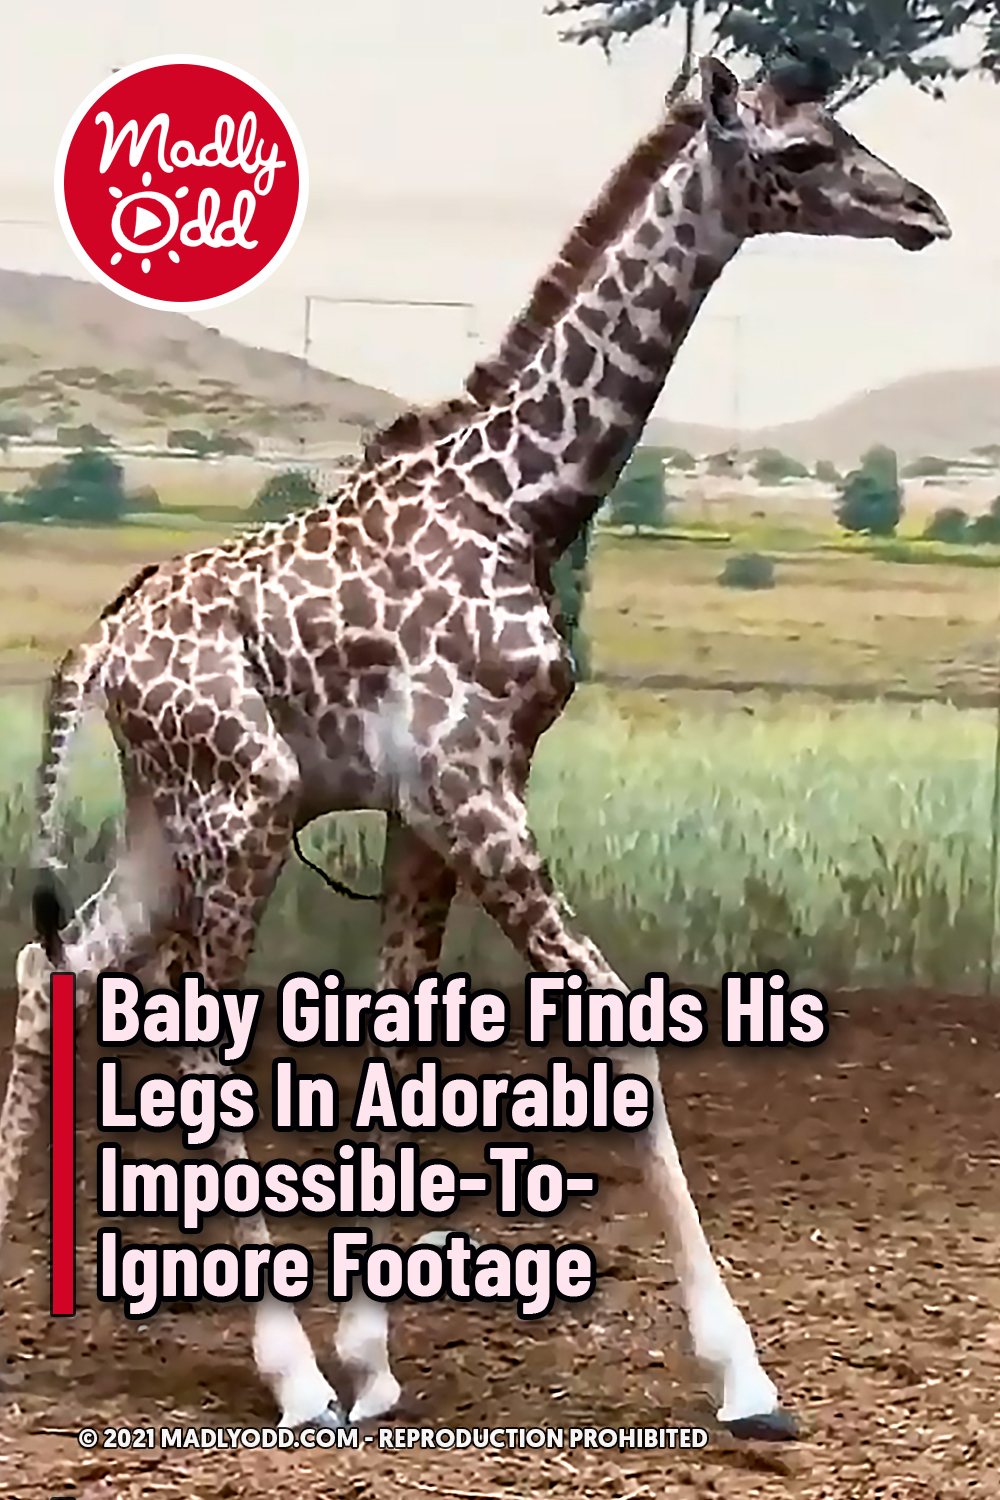 Baby Giraffe Finds His Legs In Adorable Impossible-To-Ignore Footage